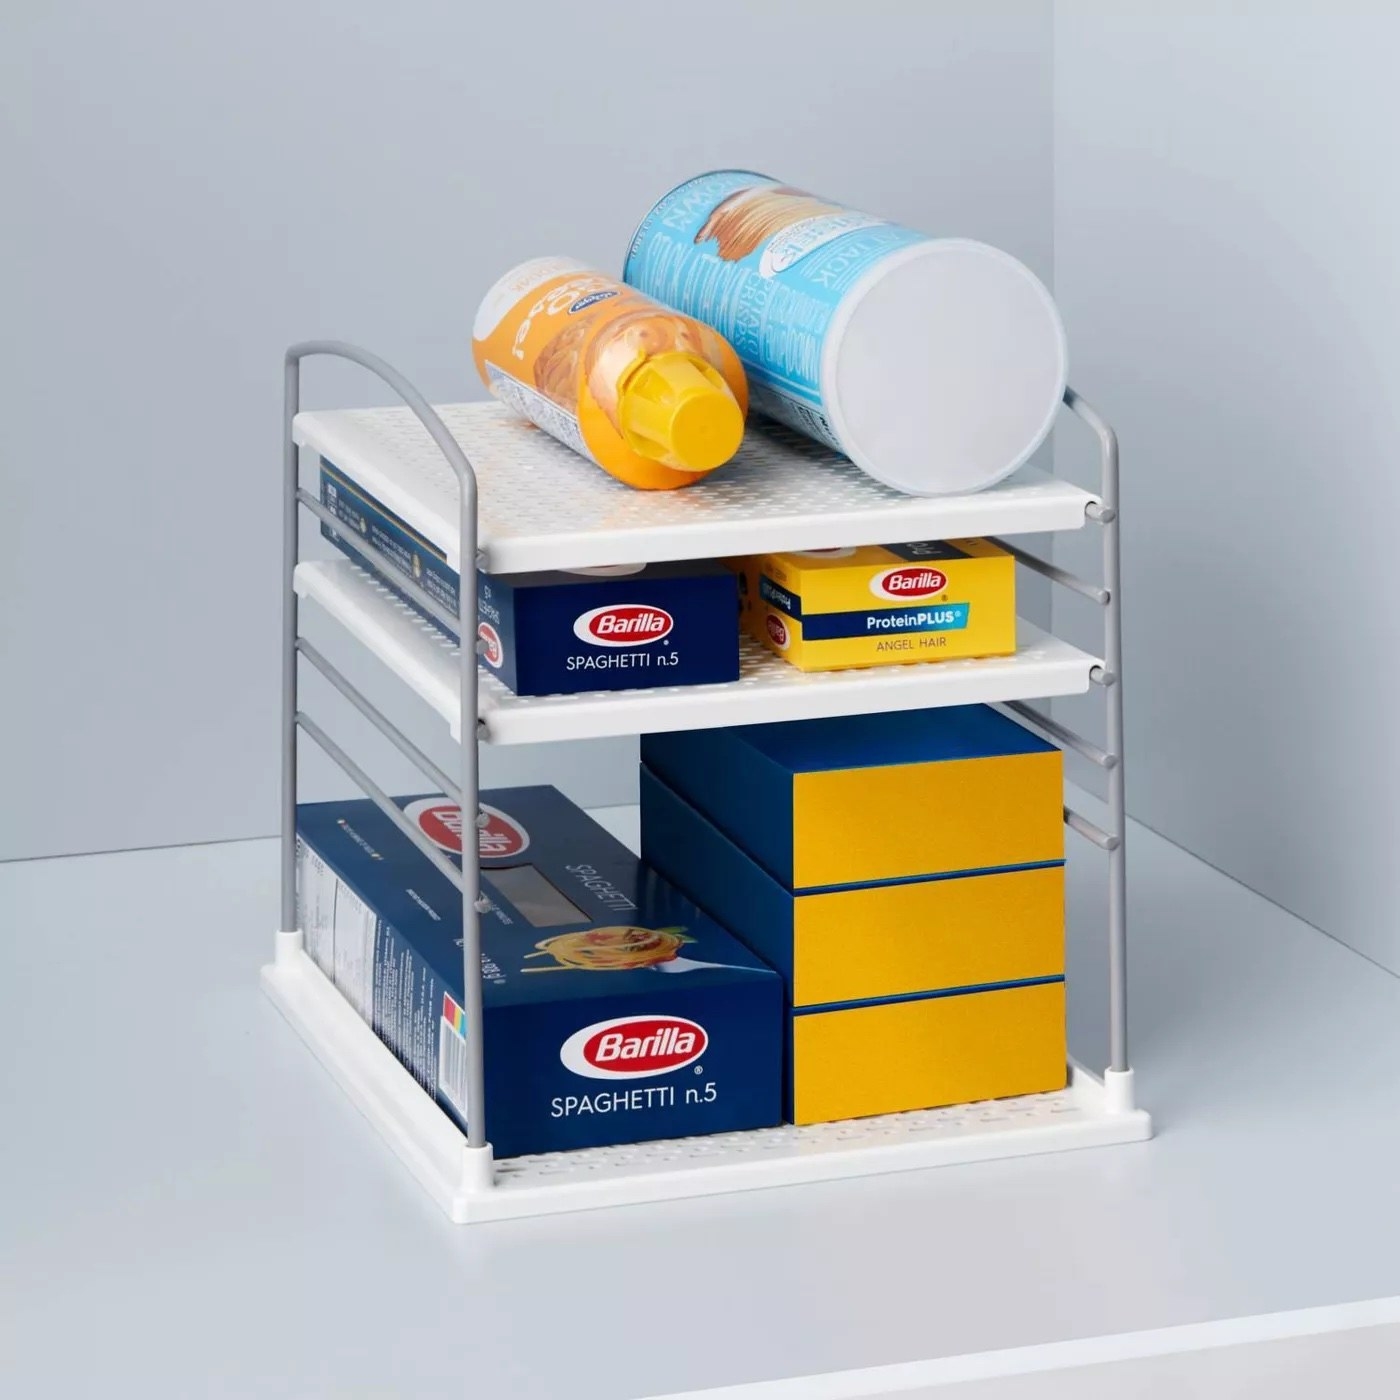 A three-tiered box organizer holding pasta boxes and spray cheese.